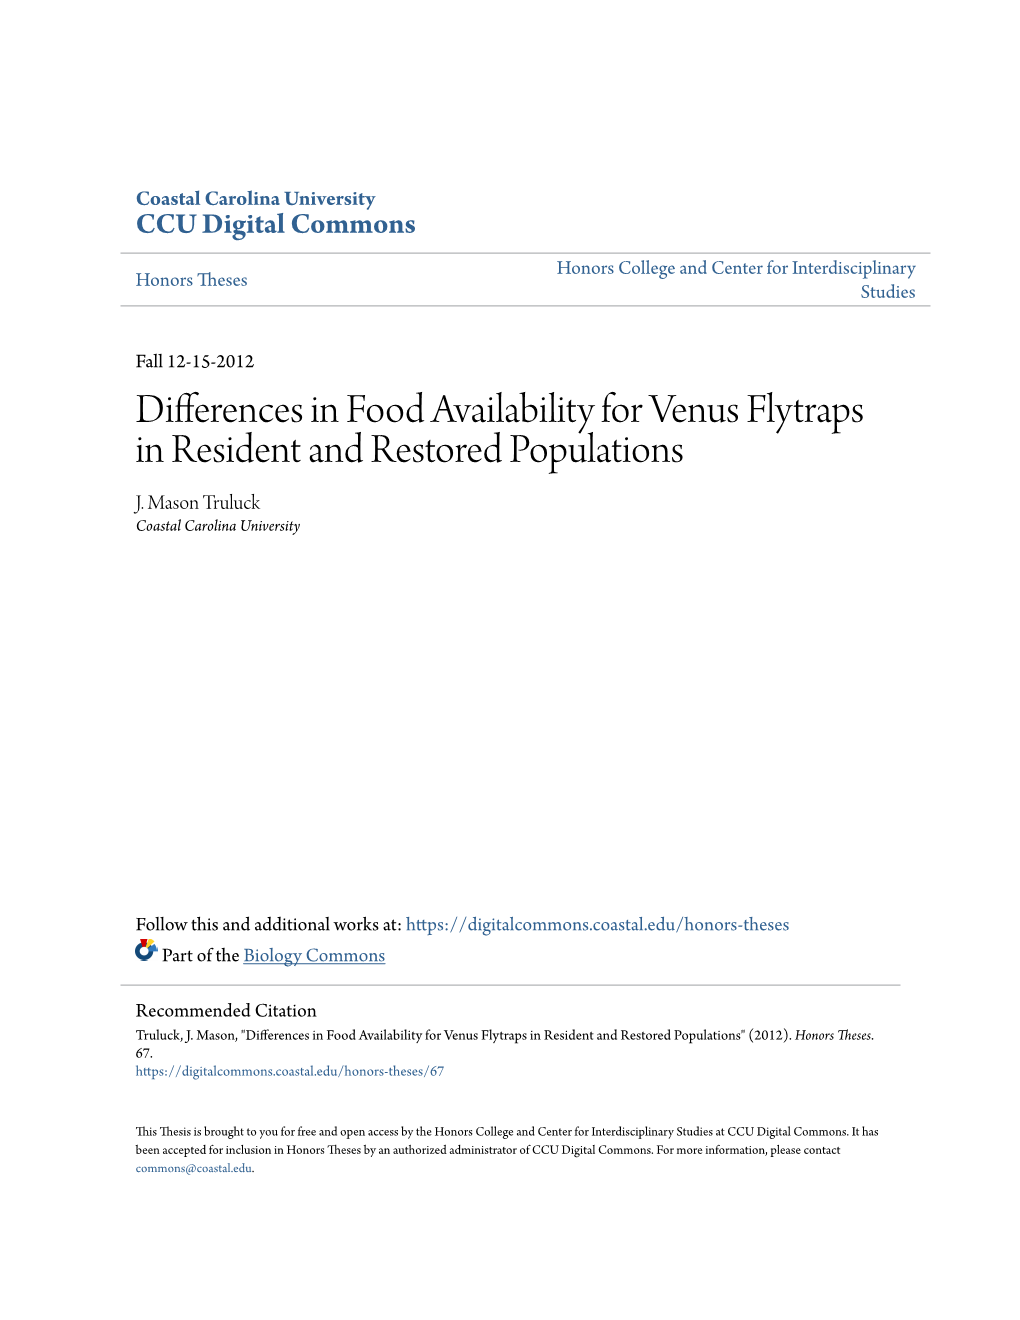 Differences in Food Availability for Venus Flytraps in Resident and Restored Populations J